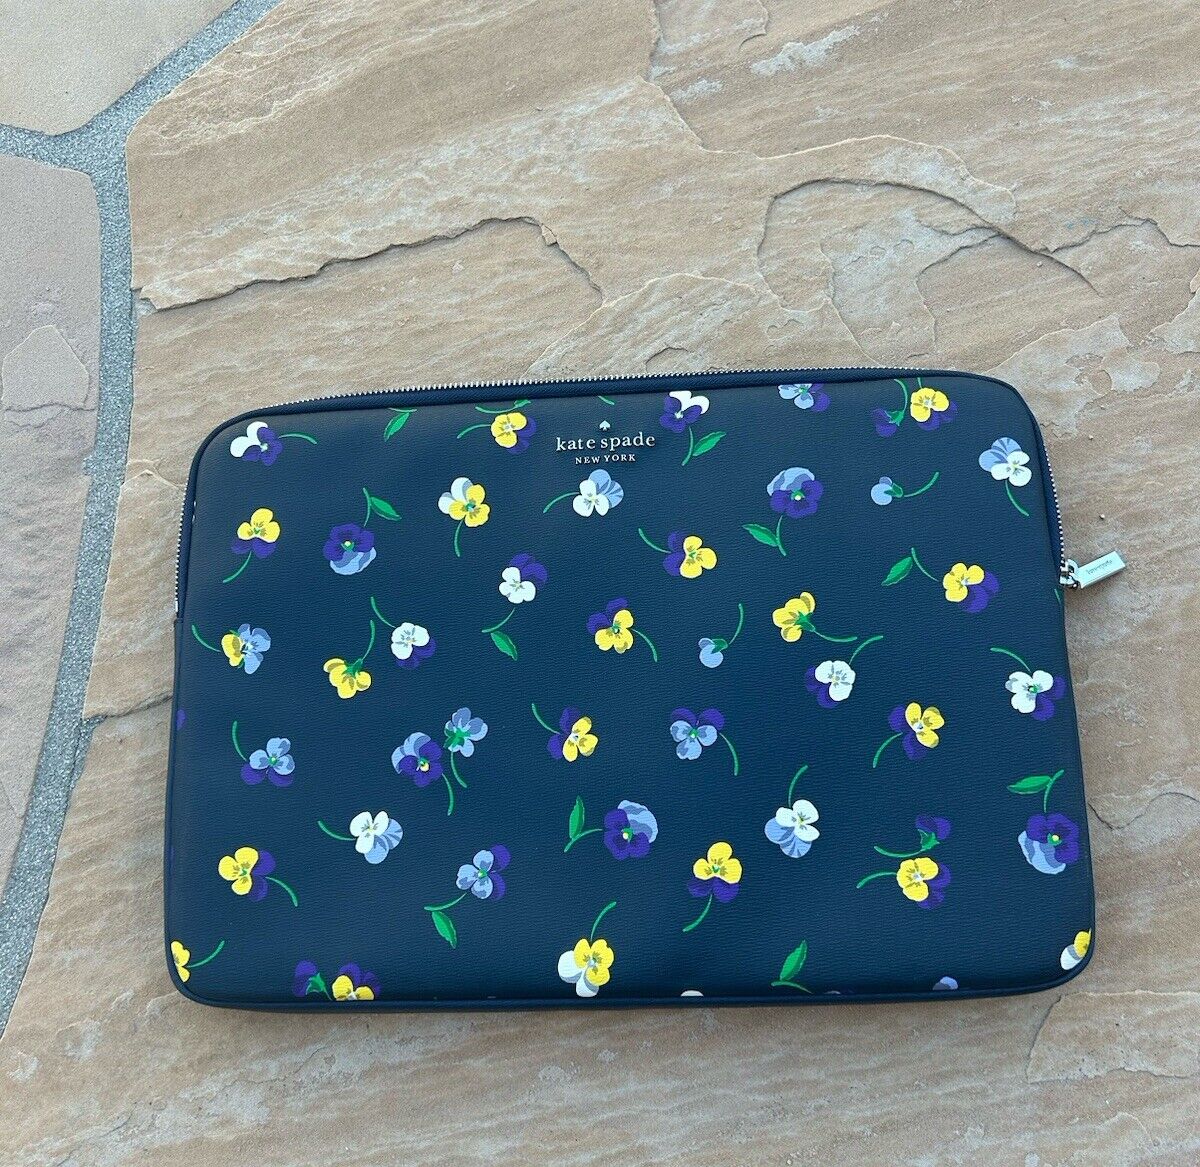 Kate Spade Padded Laptop Sleeve Abstract Floral Zipper Protective Computer Case